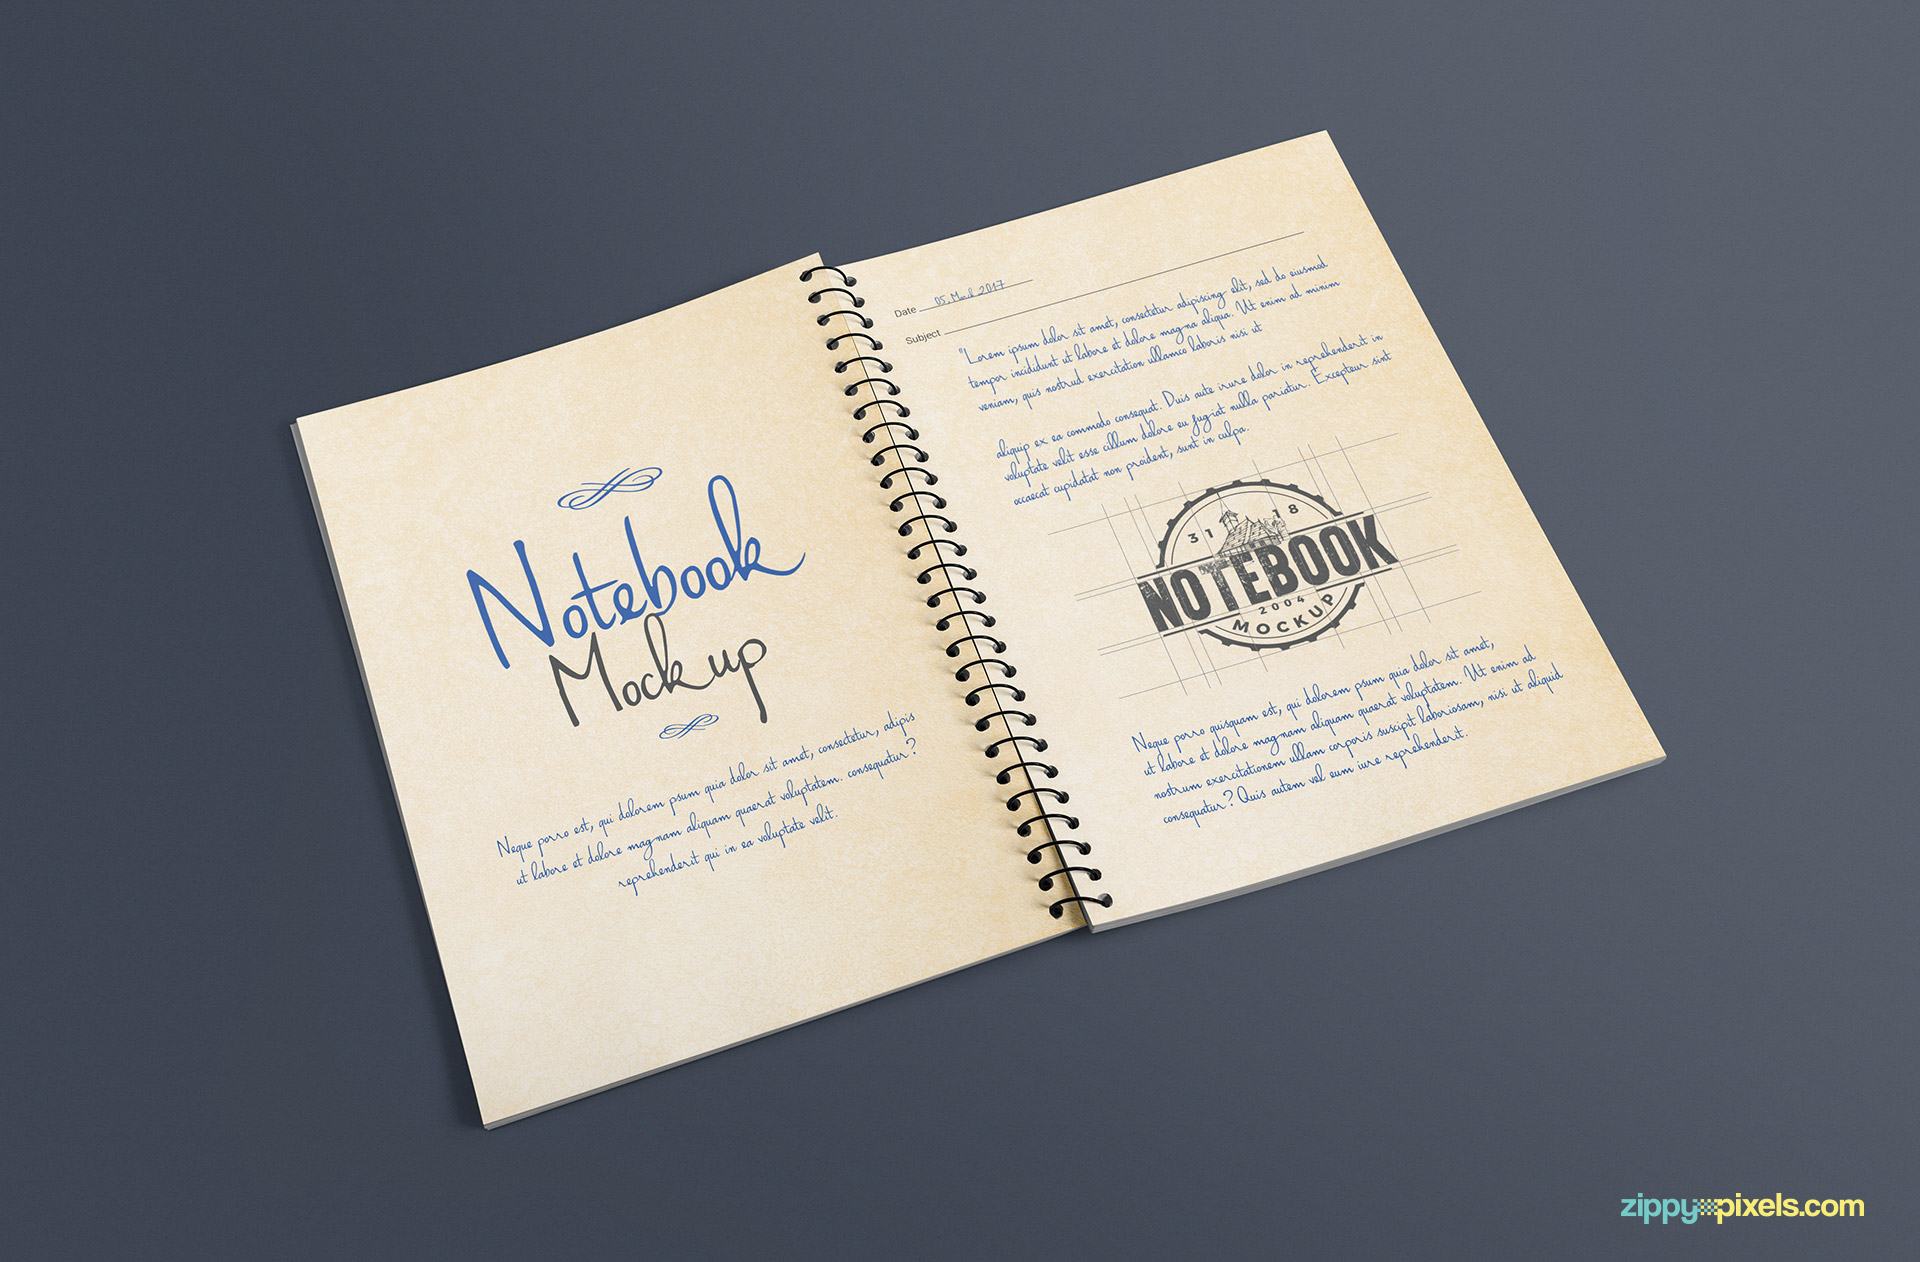 Full view of this open journal mockup PSD.